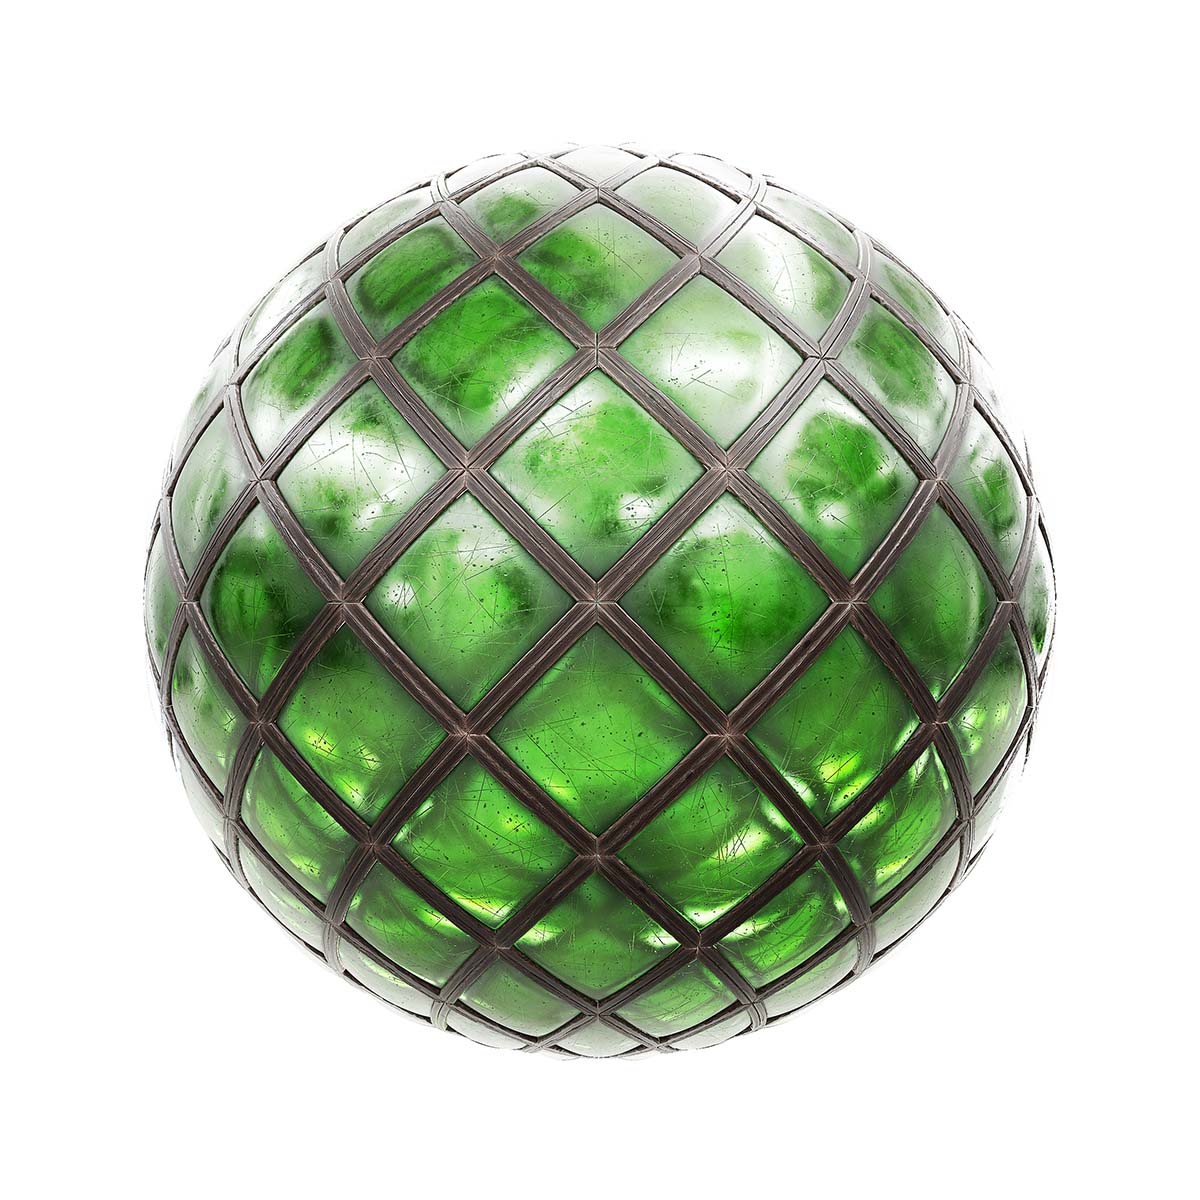 Green Stained Glass Window PBR Texture